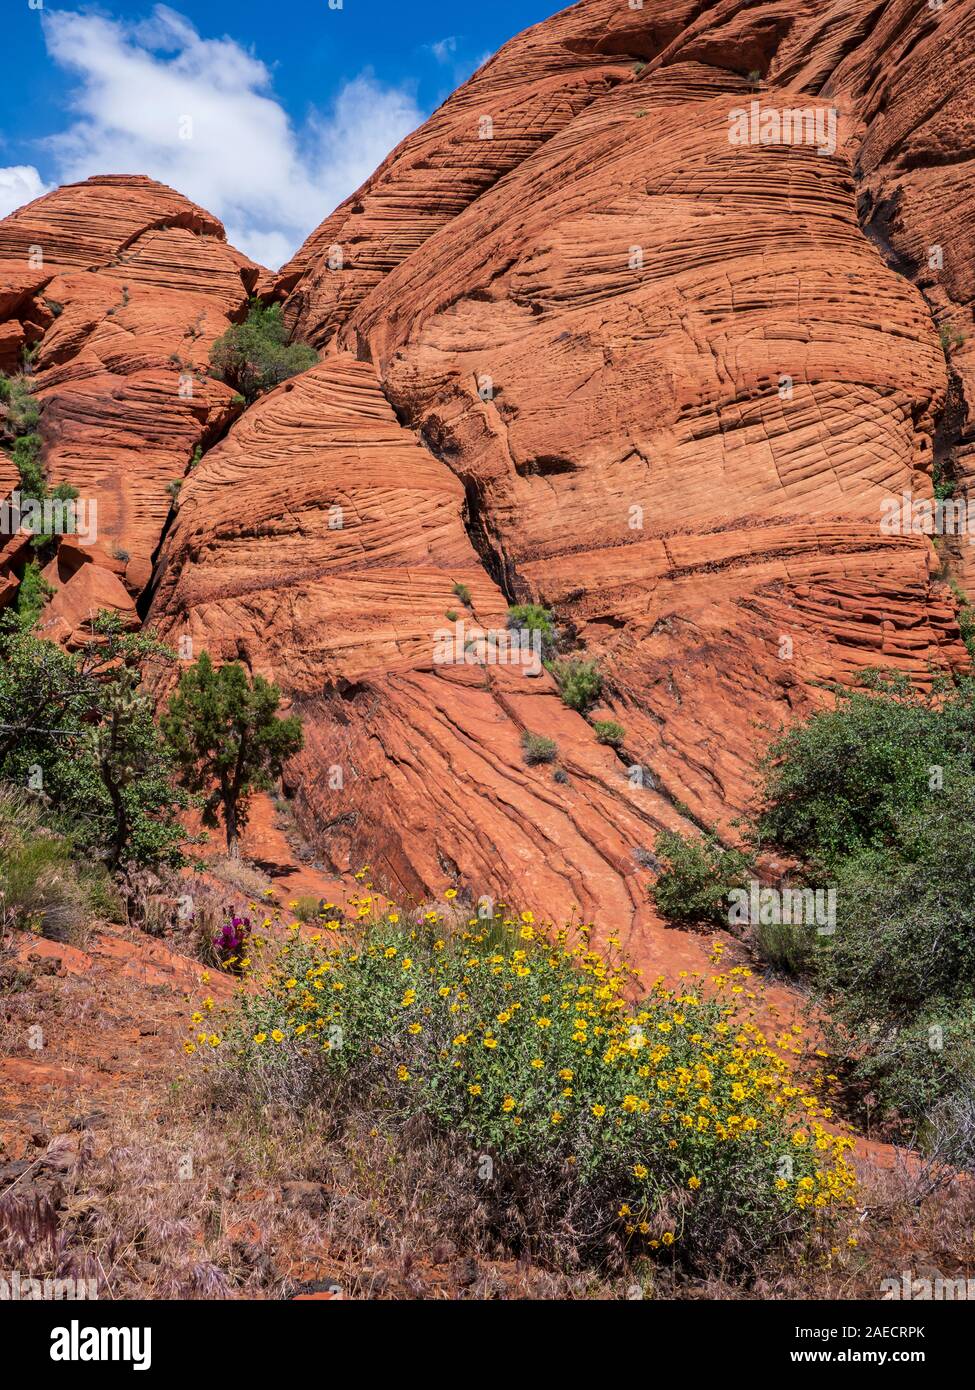 Cross-bedded sandstone and Mojave marigold flowers, Butterfly Trail, Snow Canyon State Park, Saint George, Utah. Stock Photo